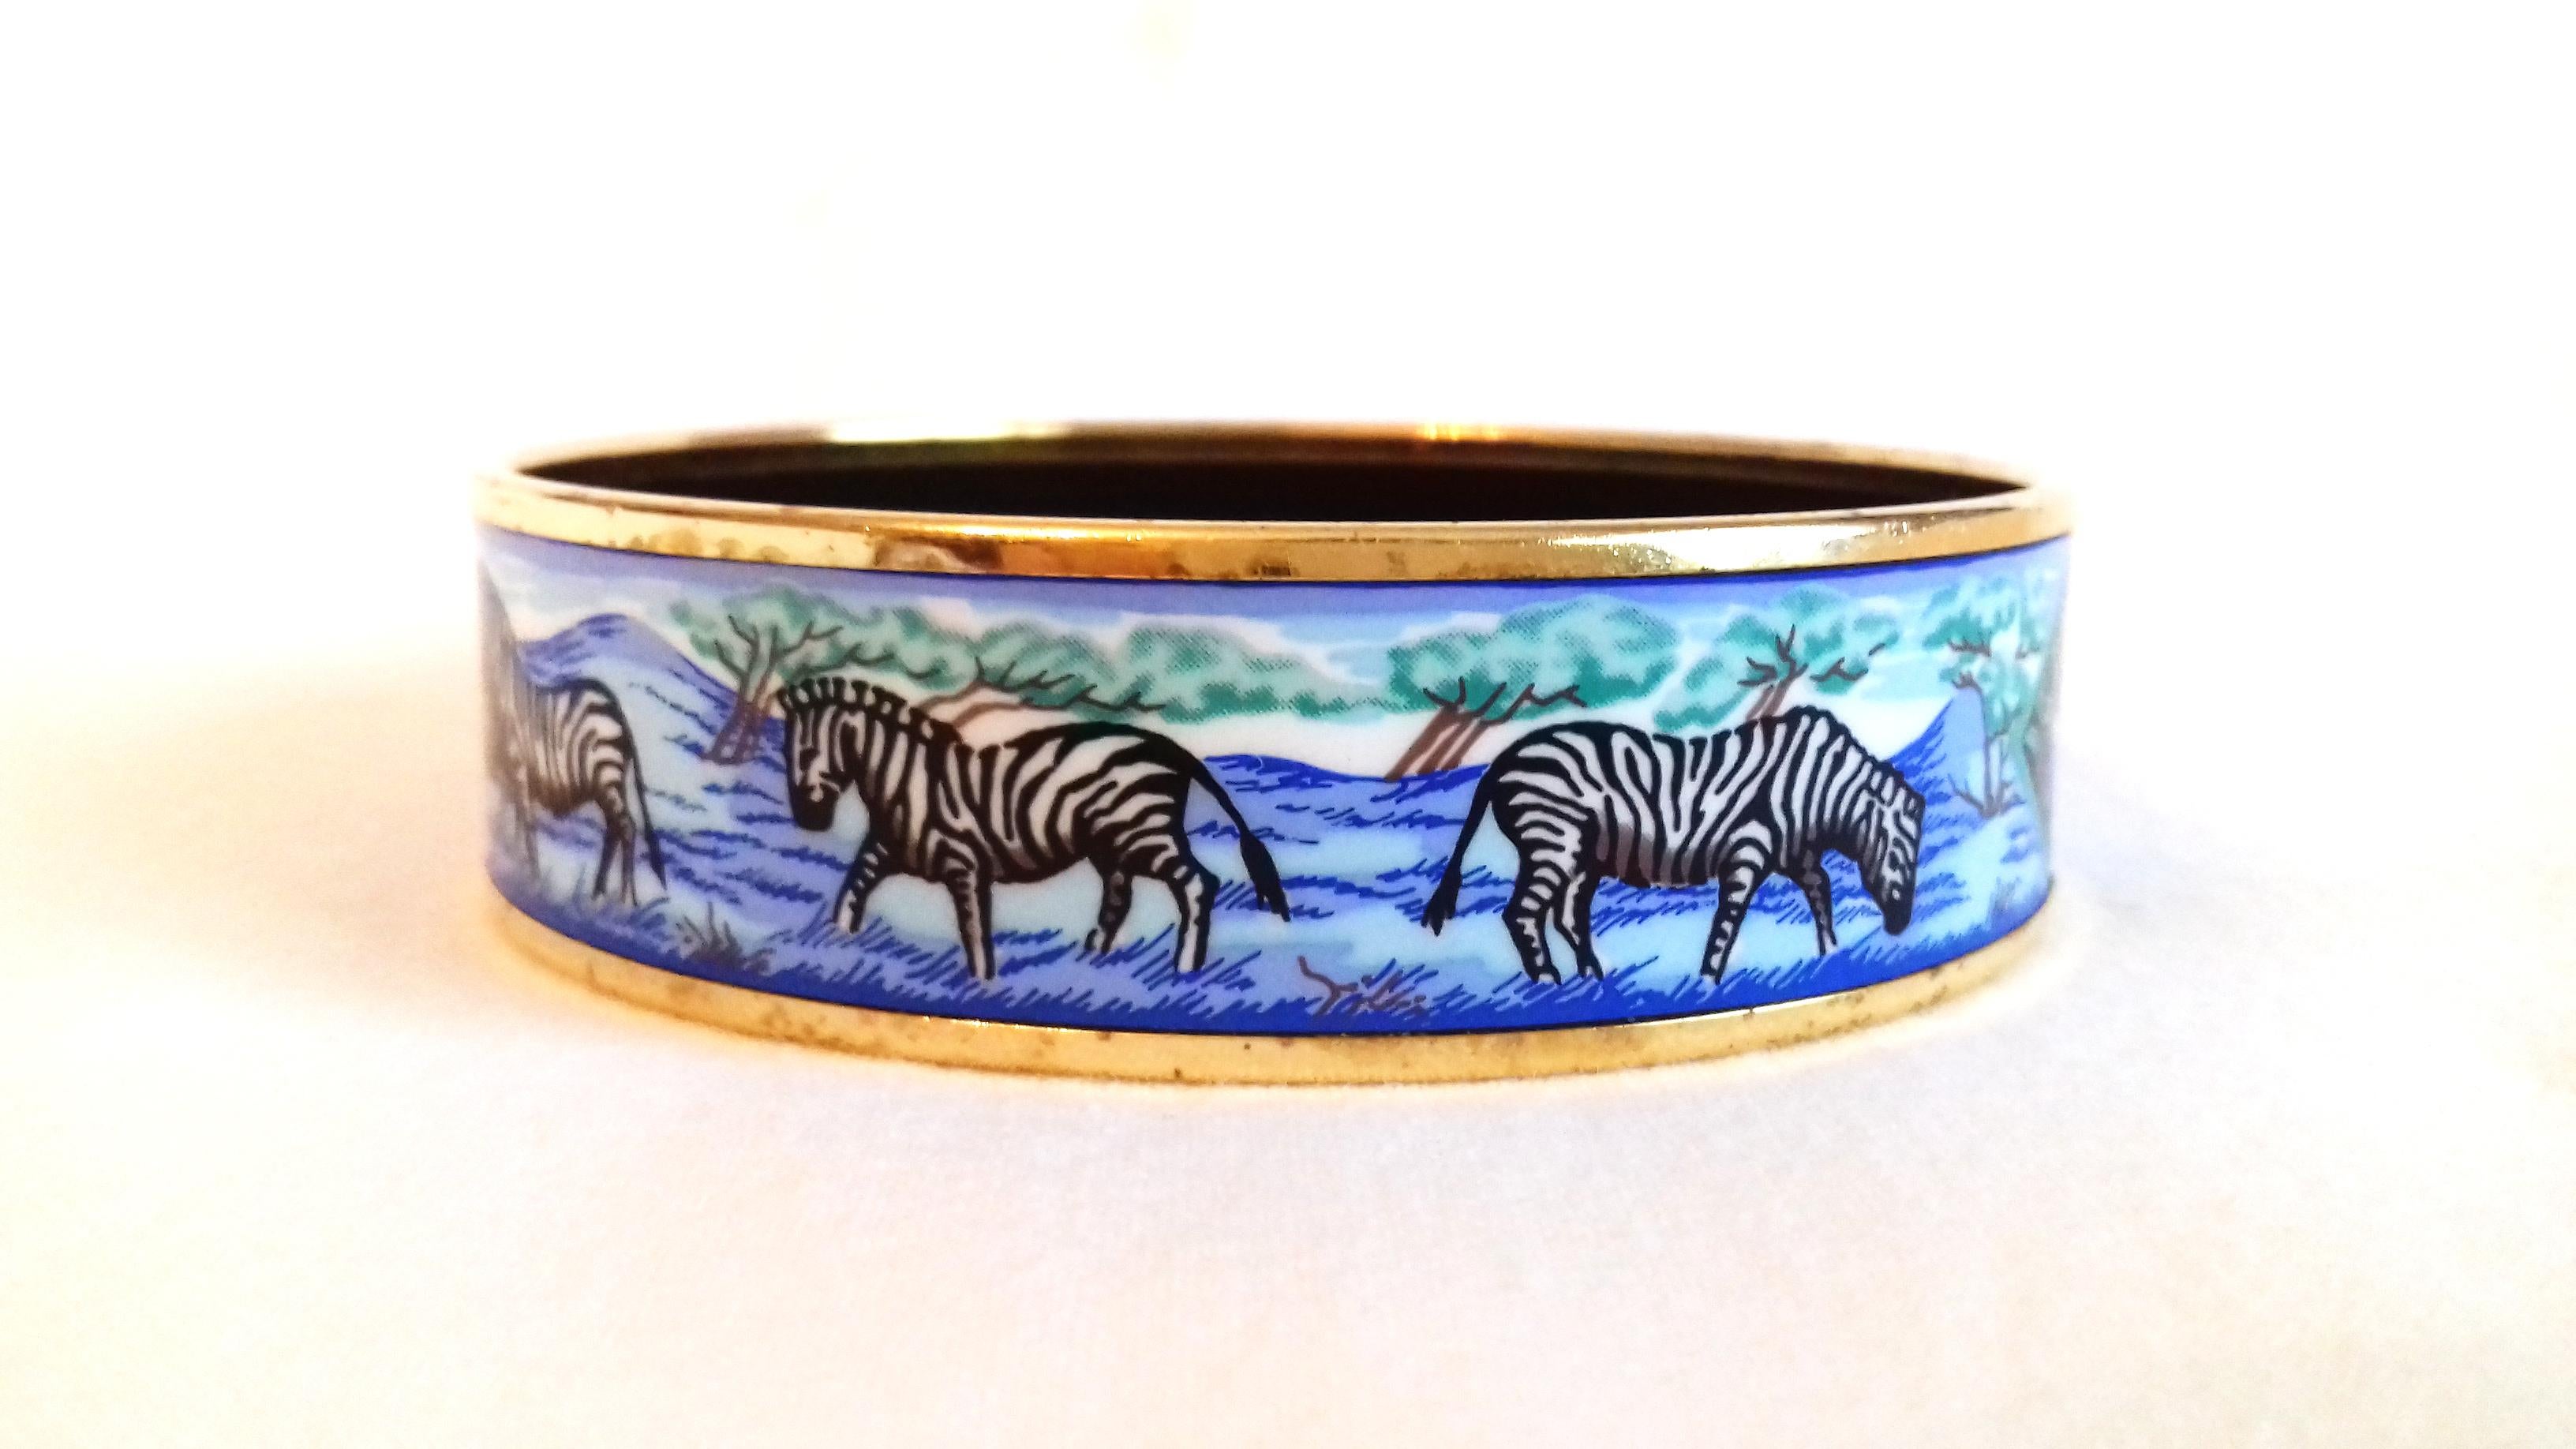 Super Rare Authentic Hermès Bracelet

Pattern: Zebras and Toucans

From the scarf called 